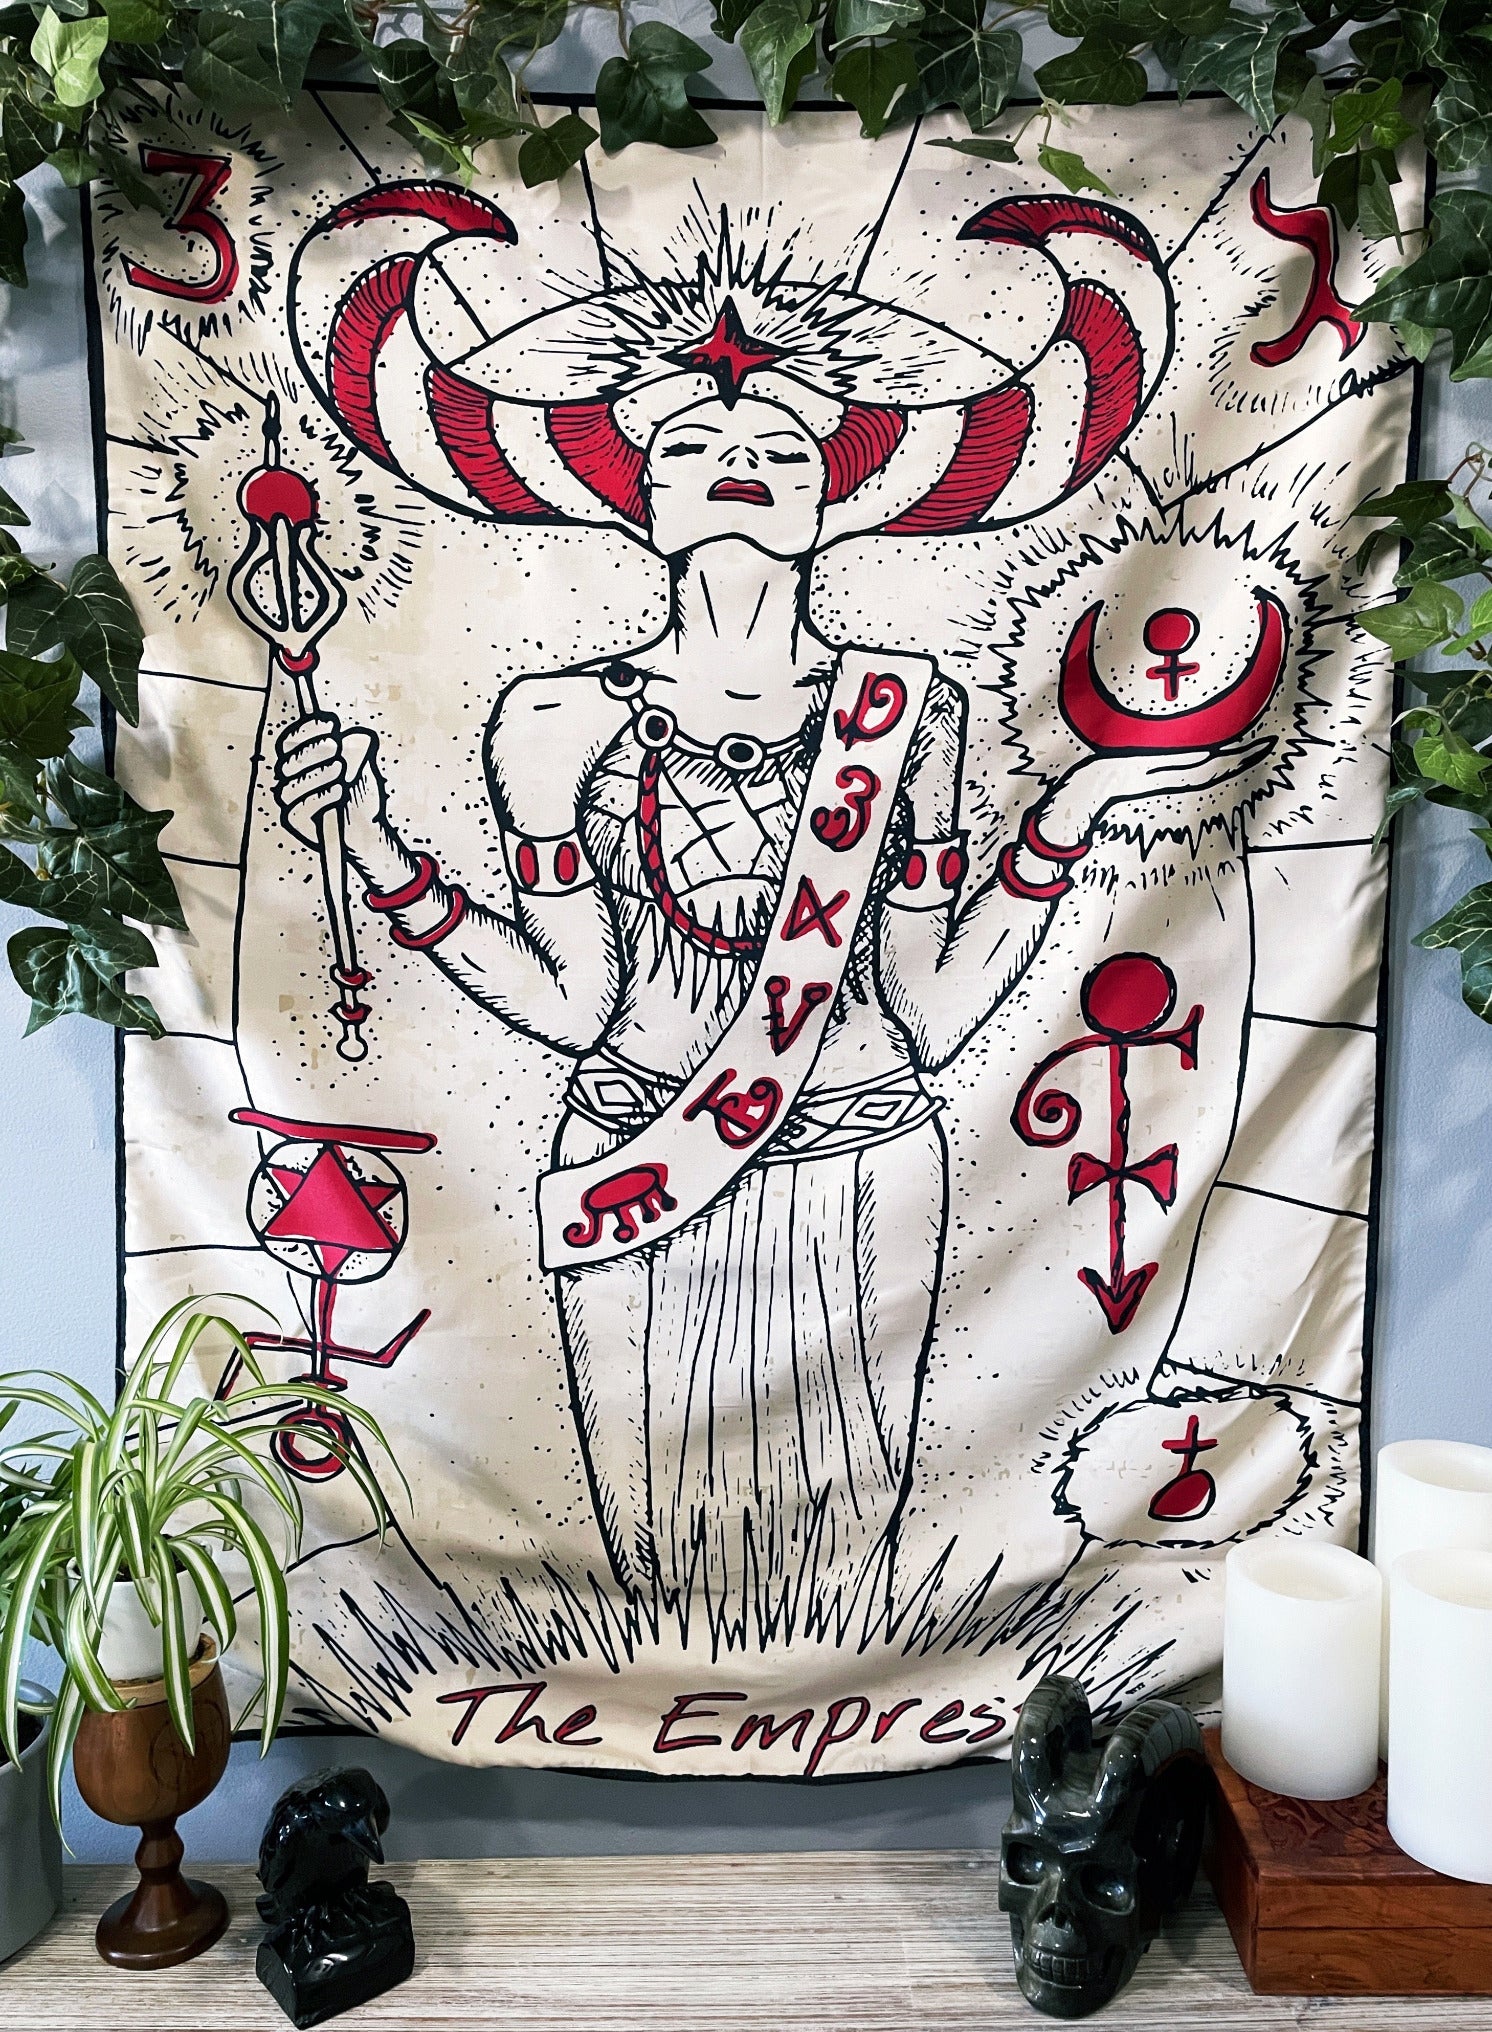 Pictured is a large wall tapestry with a white background and a tarot card of "the empress" printed in black and red on it.